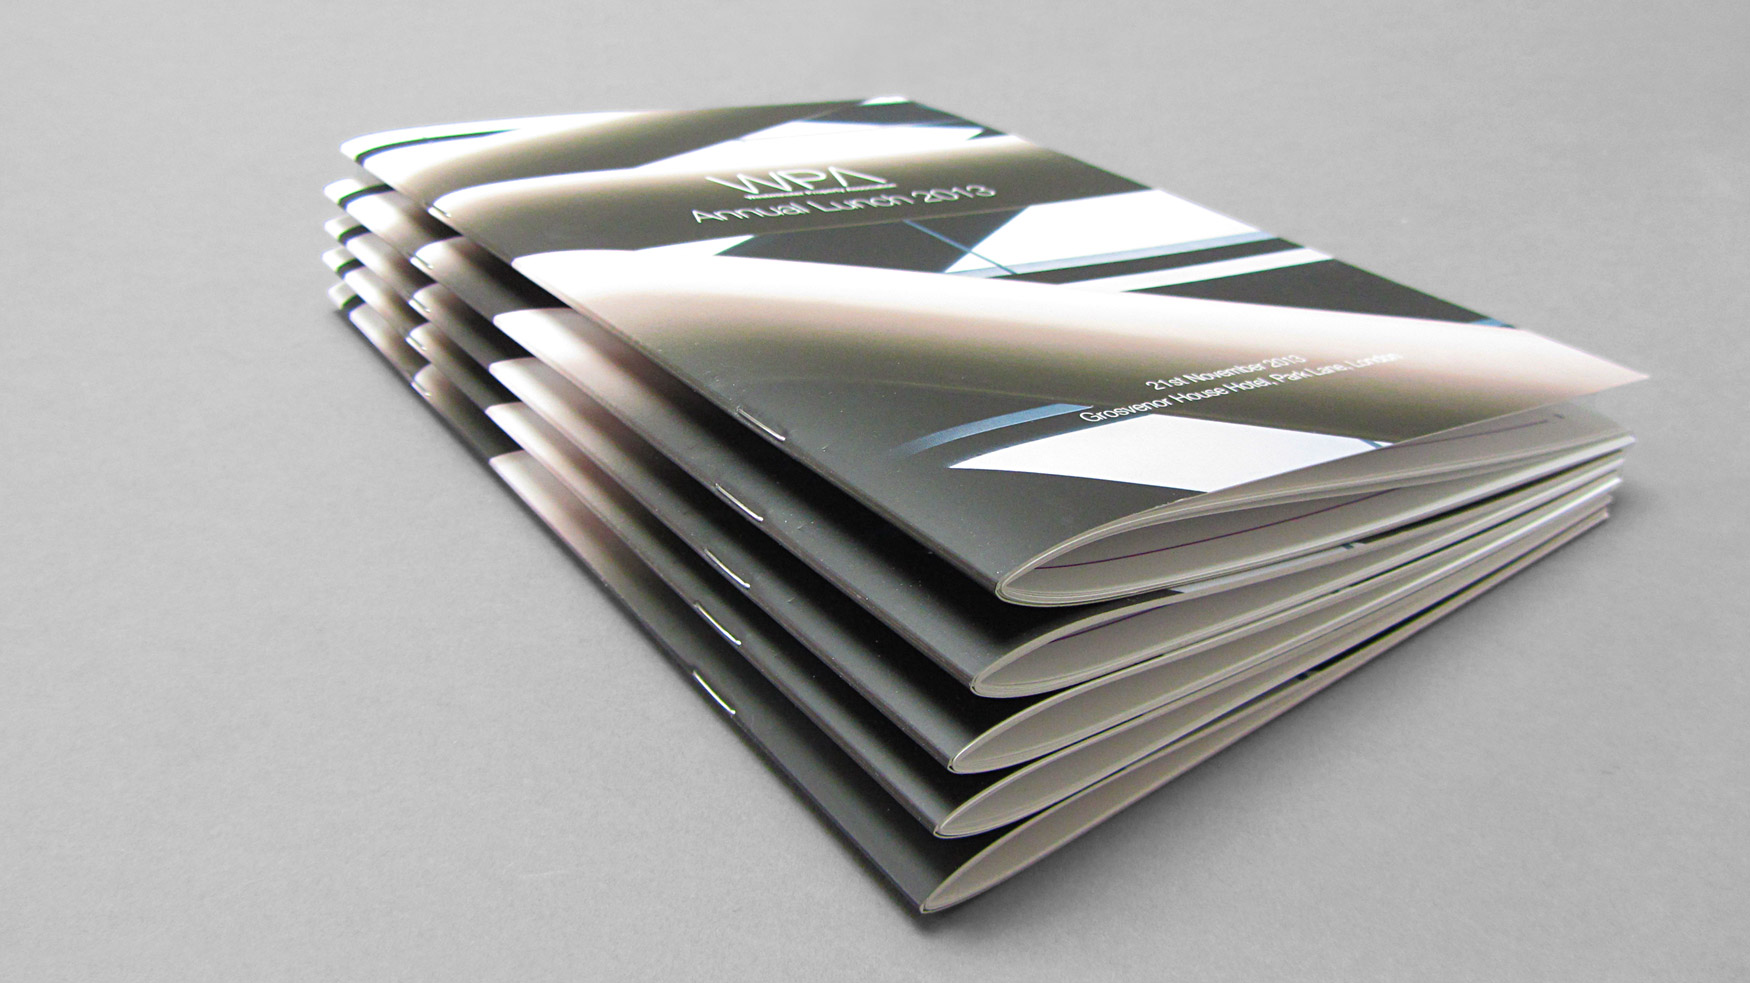 The best option for booklet printing in Asheville, NC